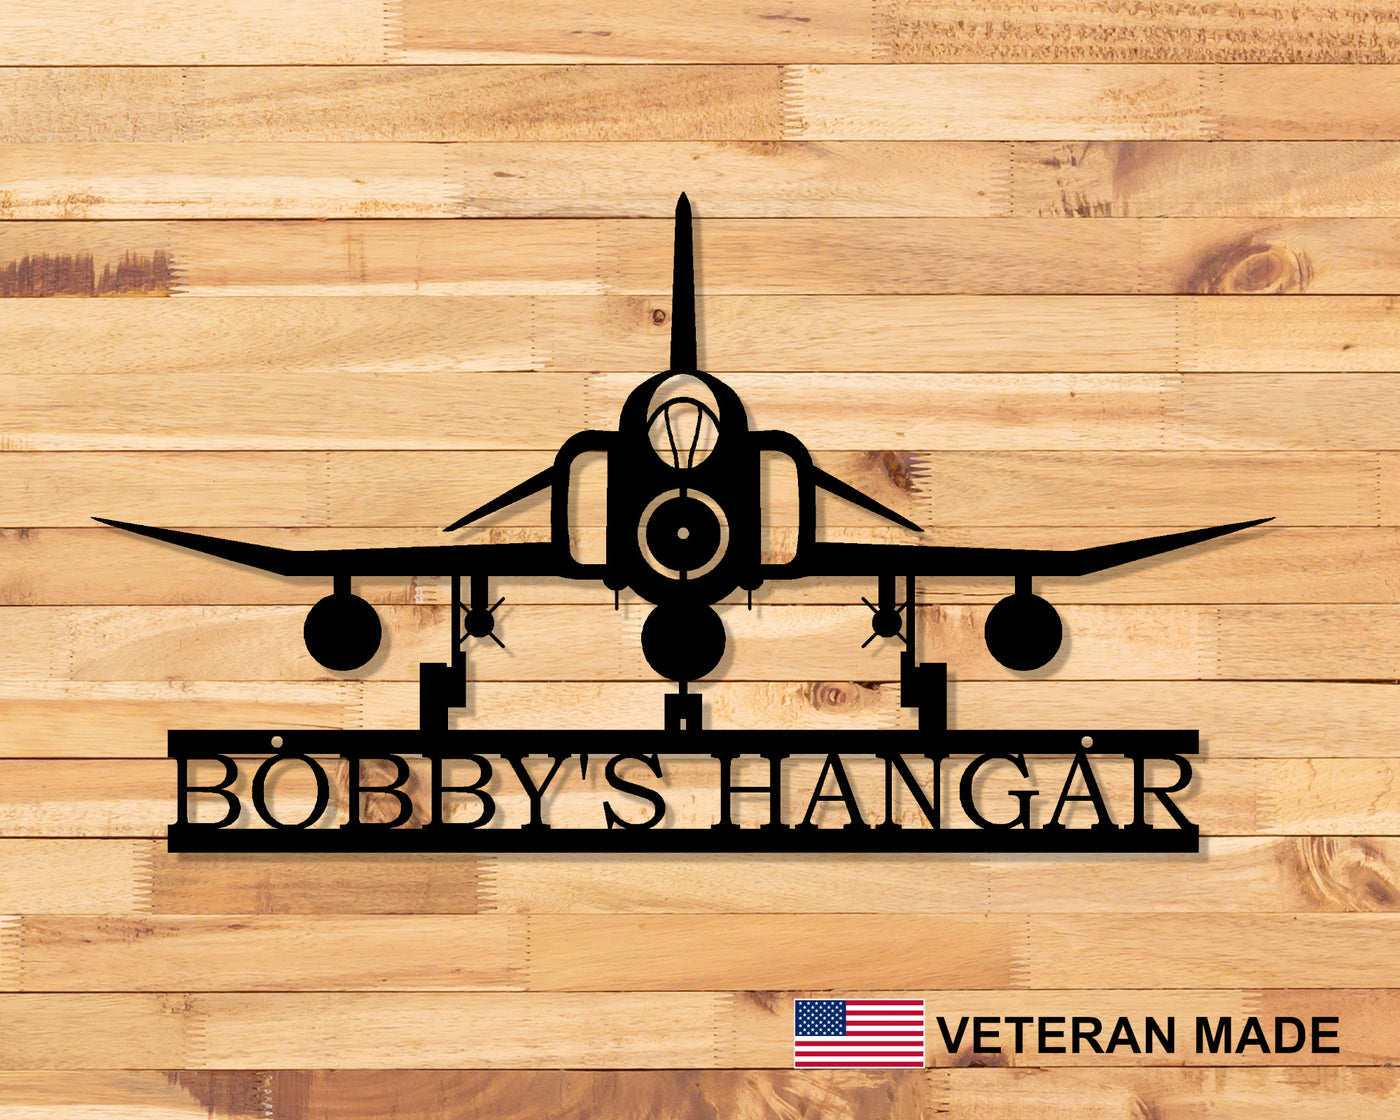 Personalized F-4 Phantom Aircraft Metal Sign - Madison Iron and Wood - Personalized sign - metal outdoor decor - Steel deocrations - american made products - veteran owned business products - fencing decorations - fencing supplies - custom wall decorations - personalized wall signs - steel - decorative post caps - steel post caps - metal post caps - brackets - structural brackets - home improvement - easter - easter decorations - easter gift - easter yard decor